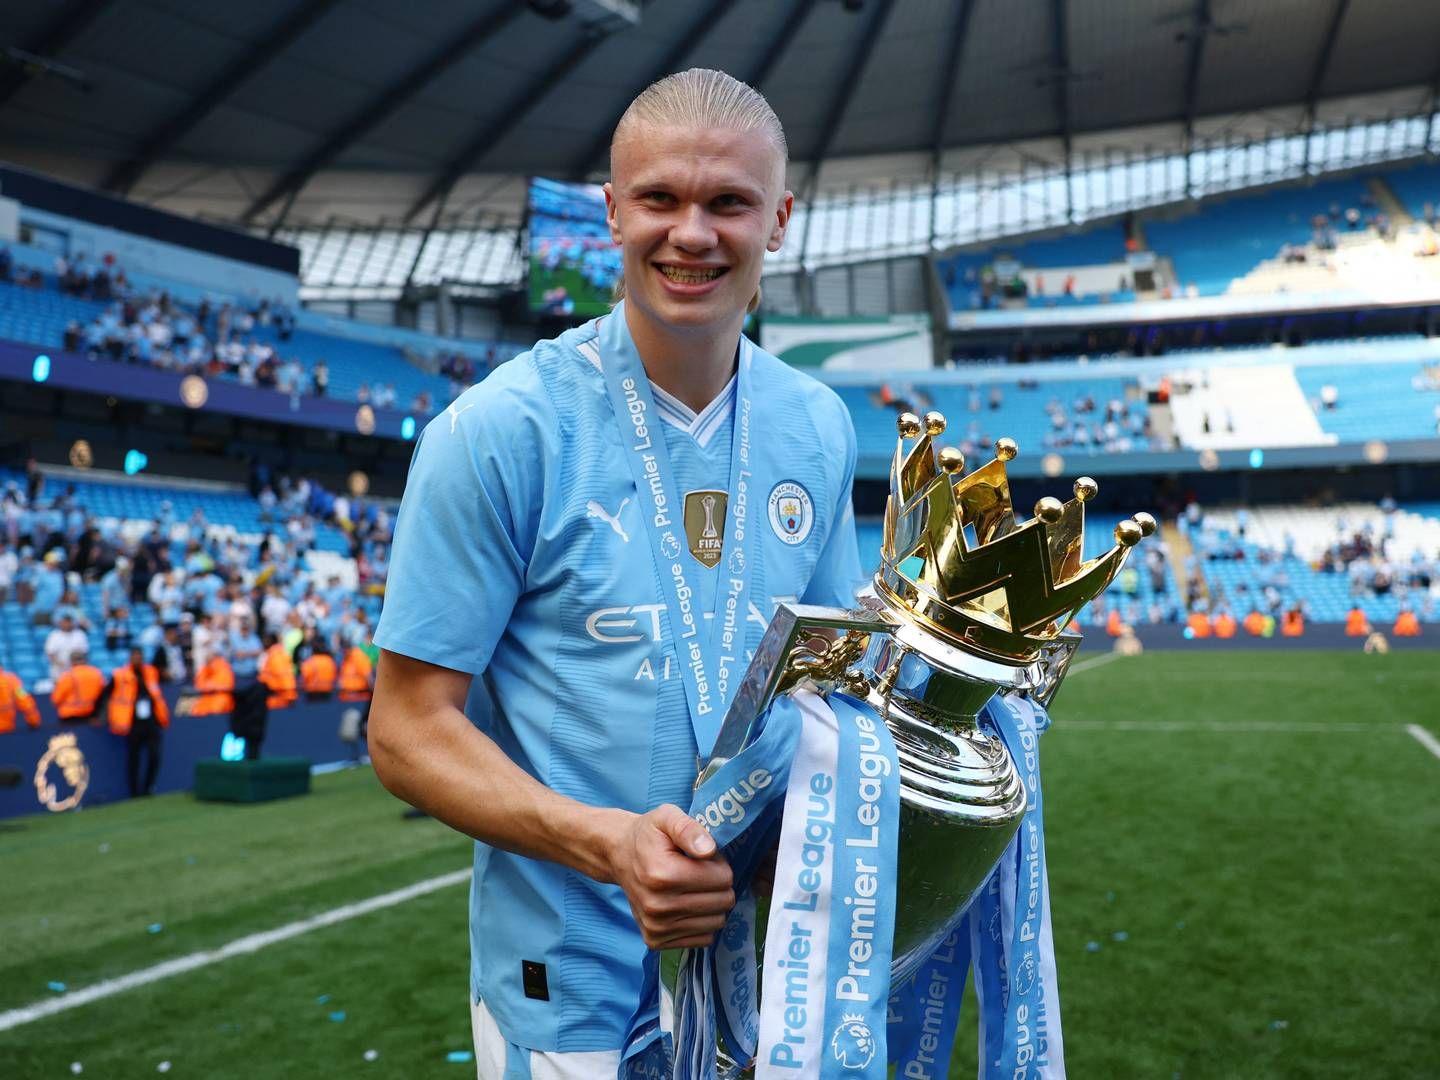 Erling Braut Haaland with the trophy after winning the Premier League on May 19. | Photo: Molly Darlington/Reuters/Ritzau Scanpix